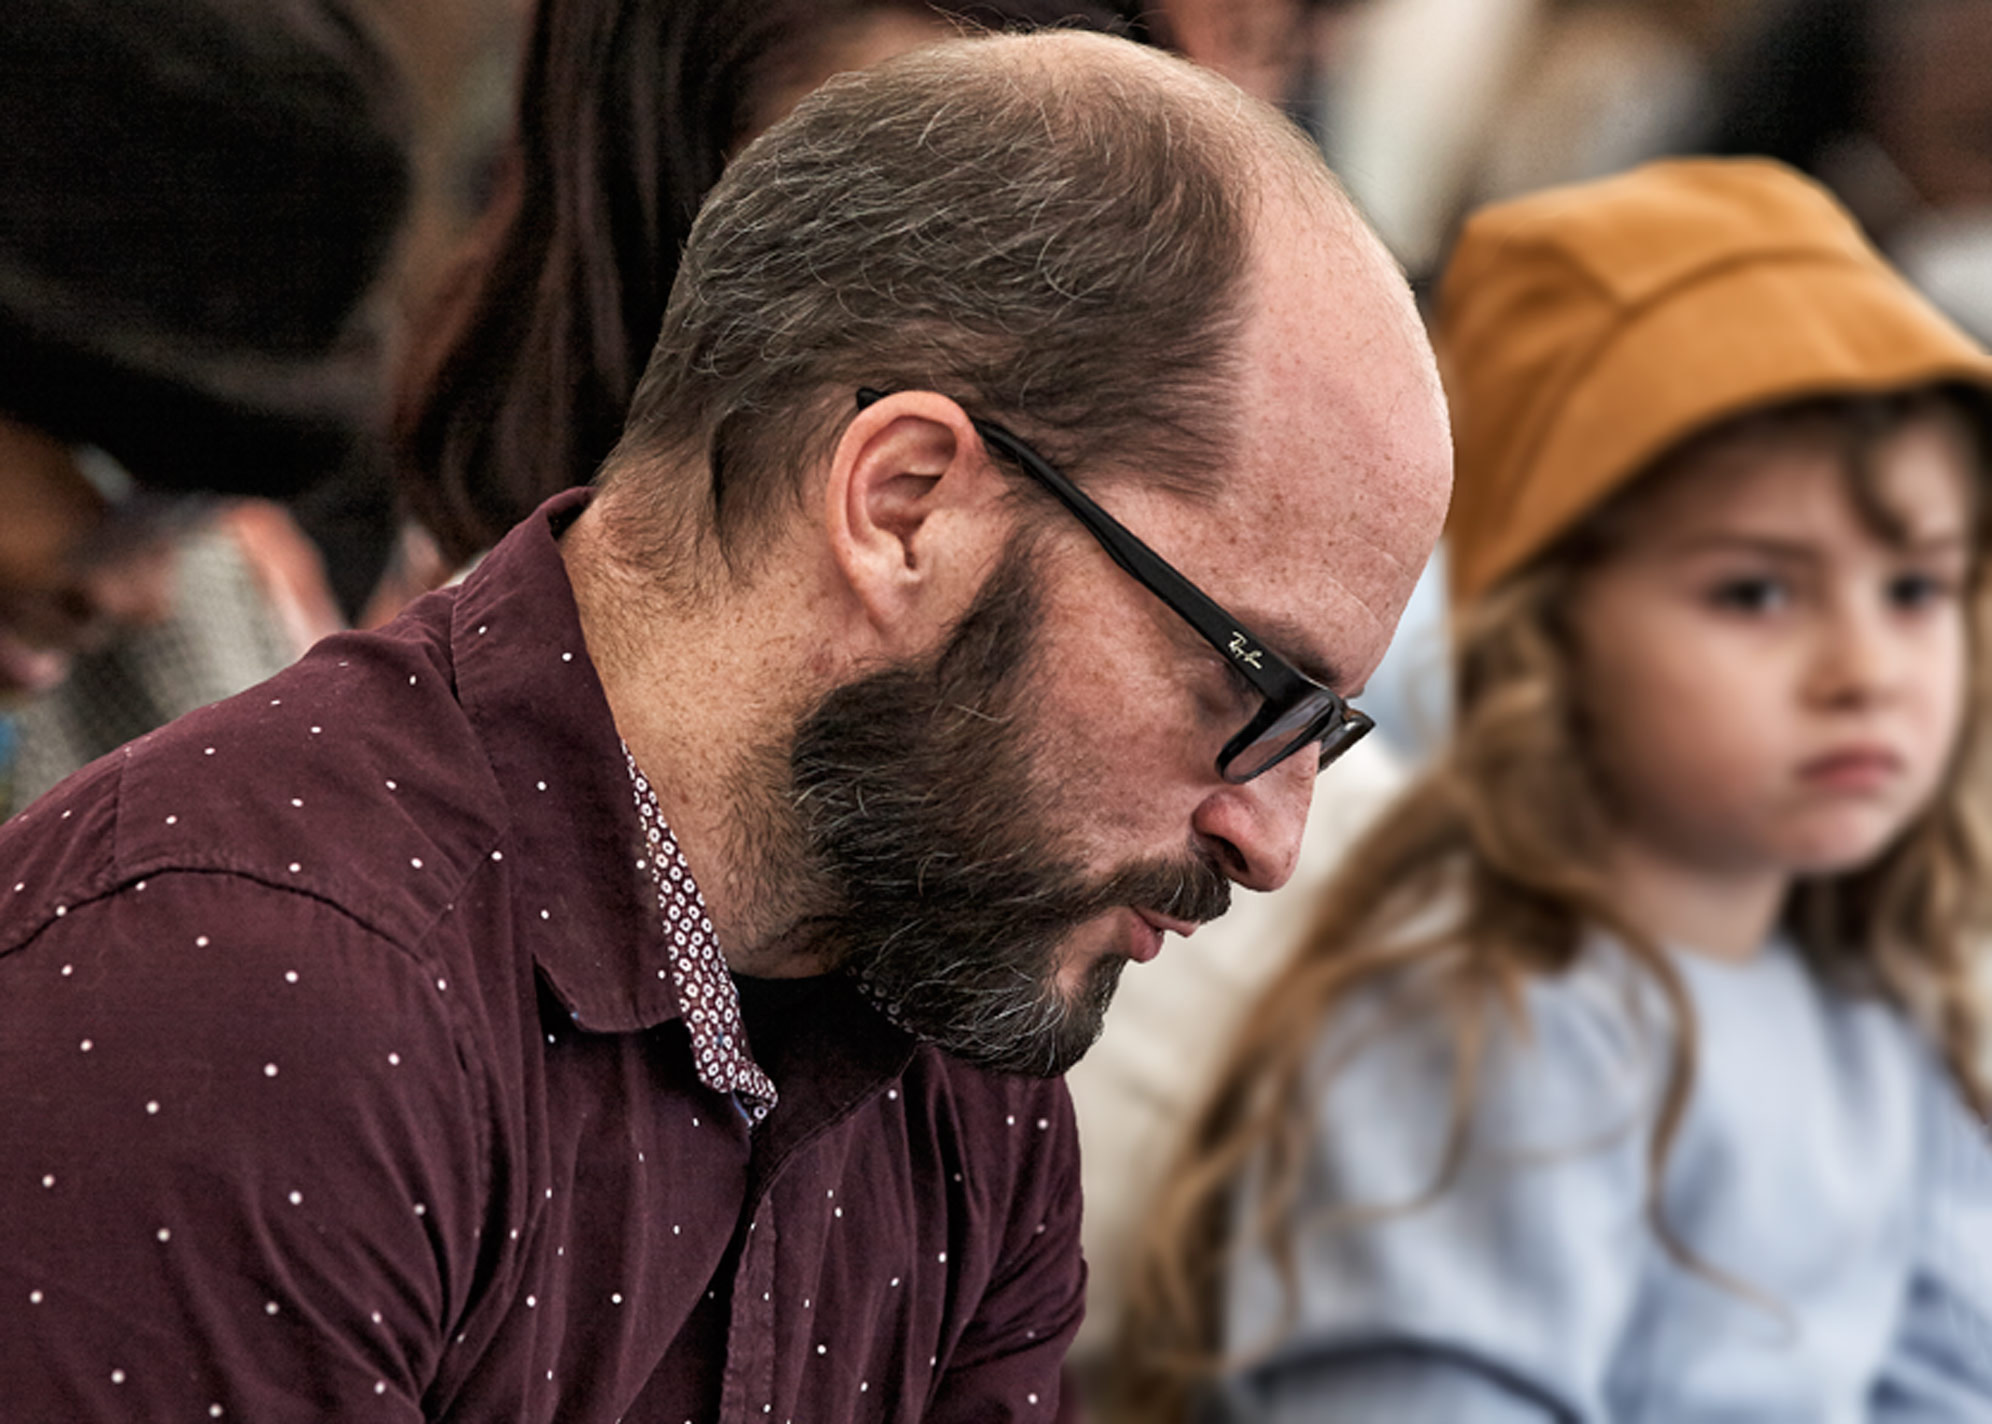  Lifestyle Portrait Of Seated Father In North Central Ohio With Receding Hair Line And Beard Wearing Black Glasses Peering Down Child Adjacent Using Bokeh To Enhance Scene  At Warsaw CMI Revival By An Ohio Commercial Photographer Dennis Harber 